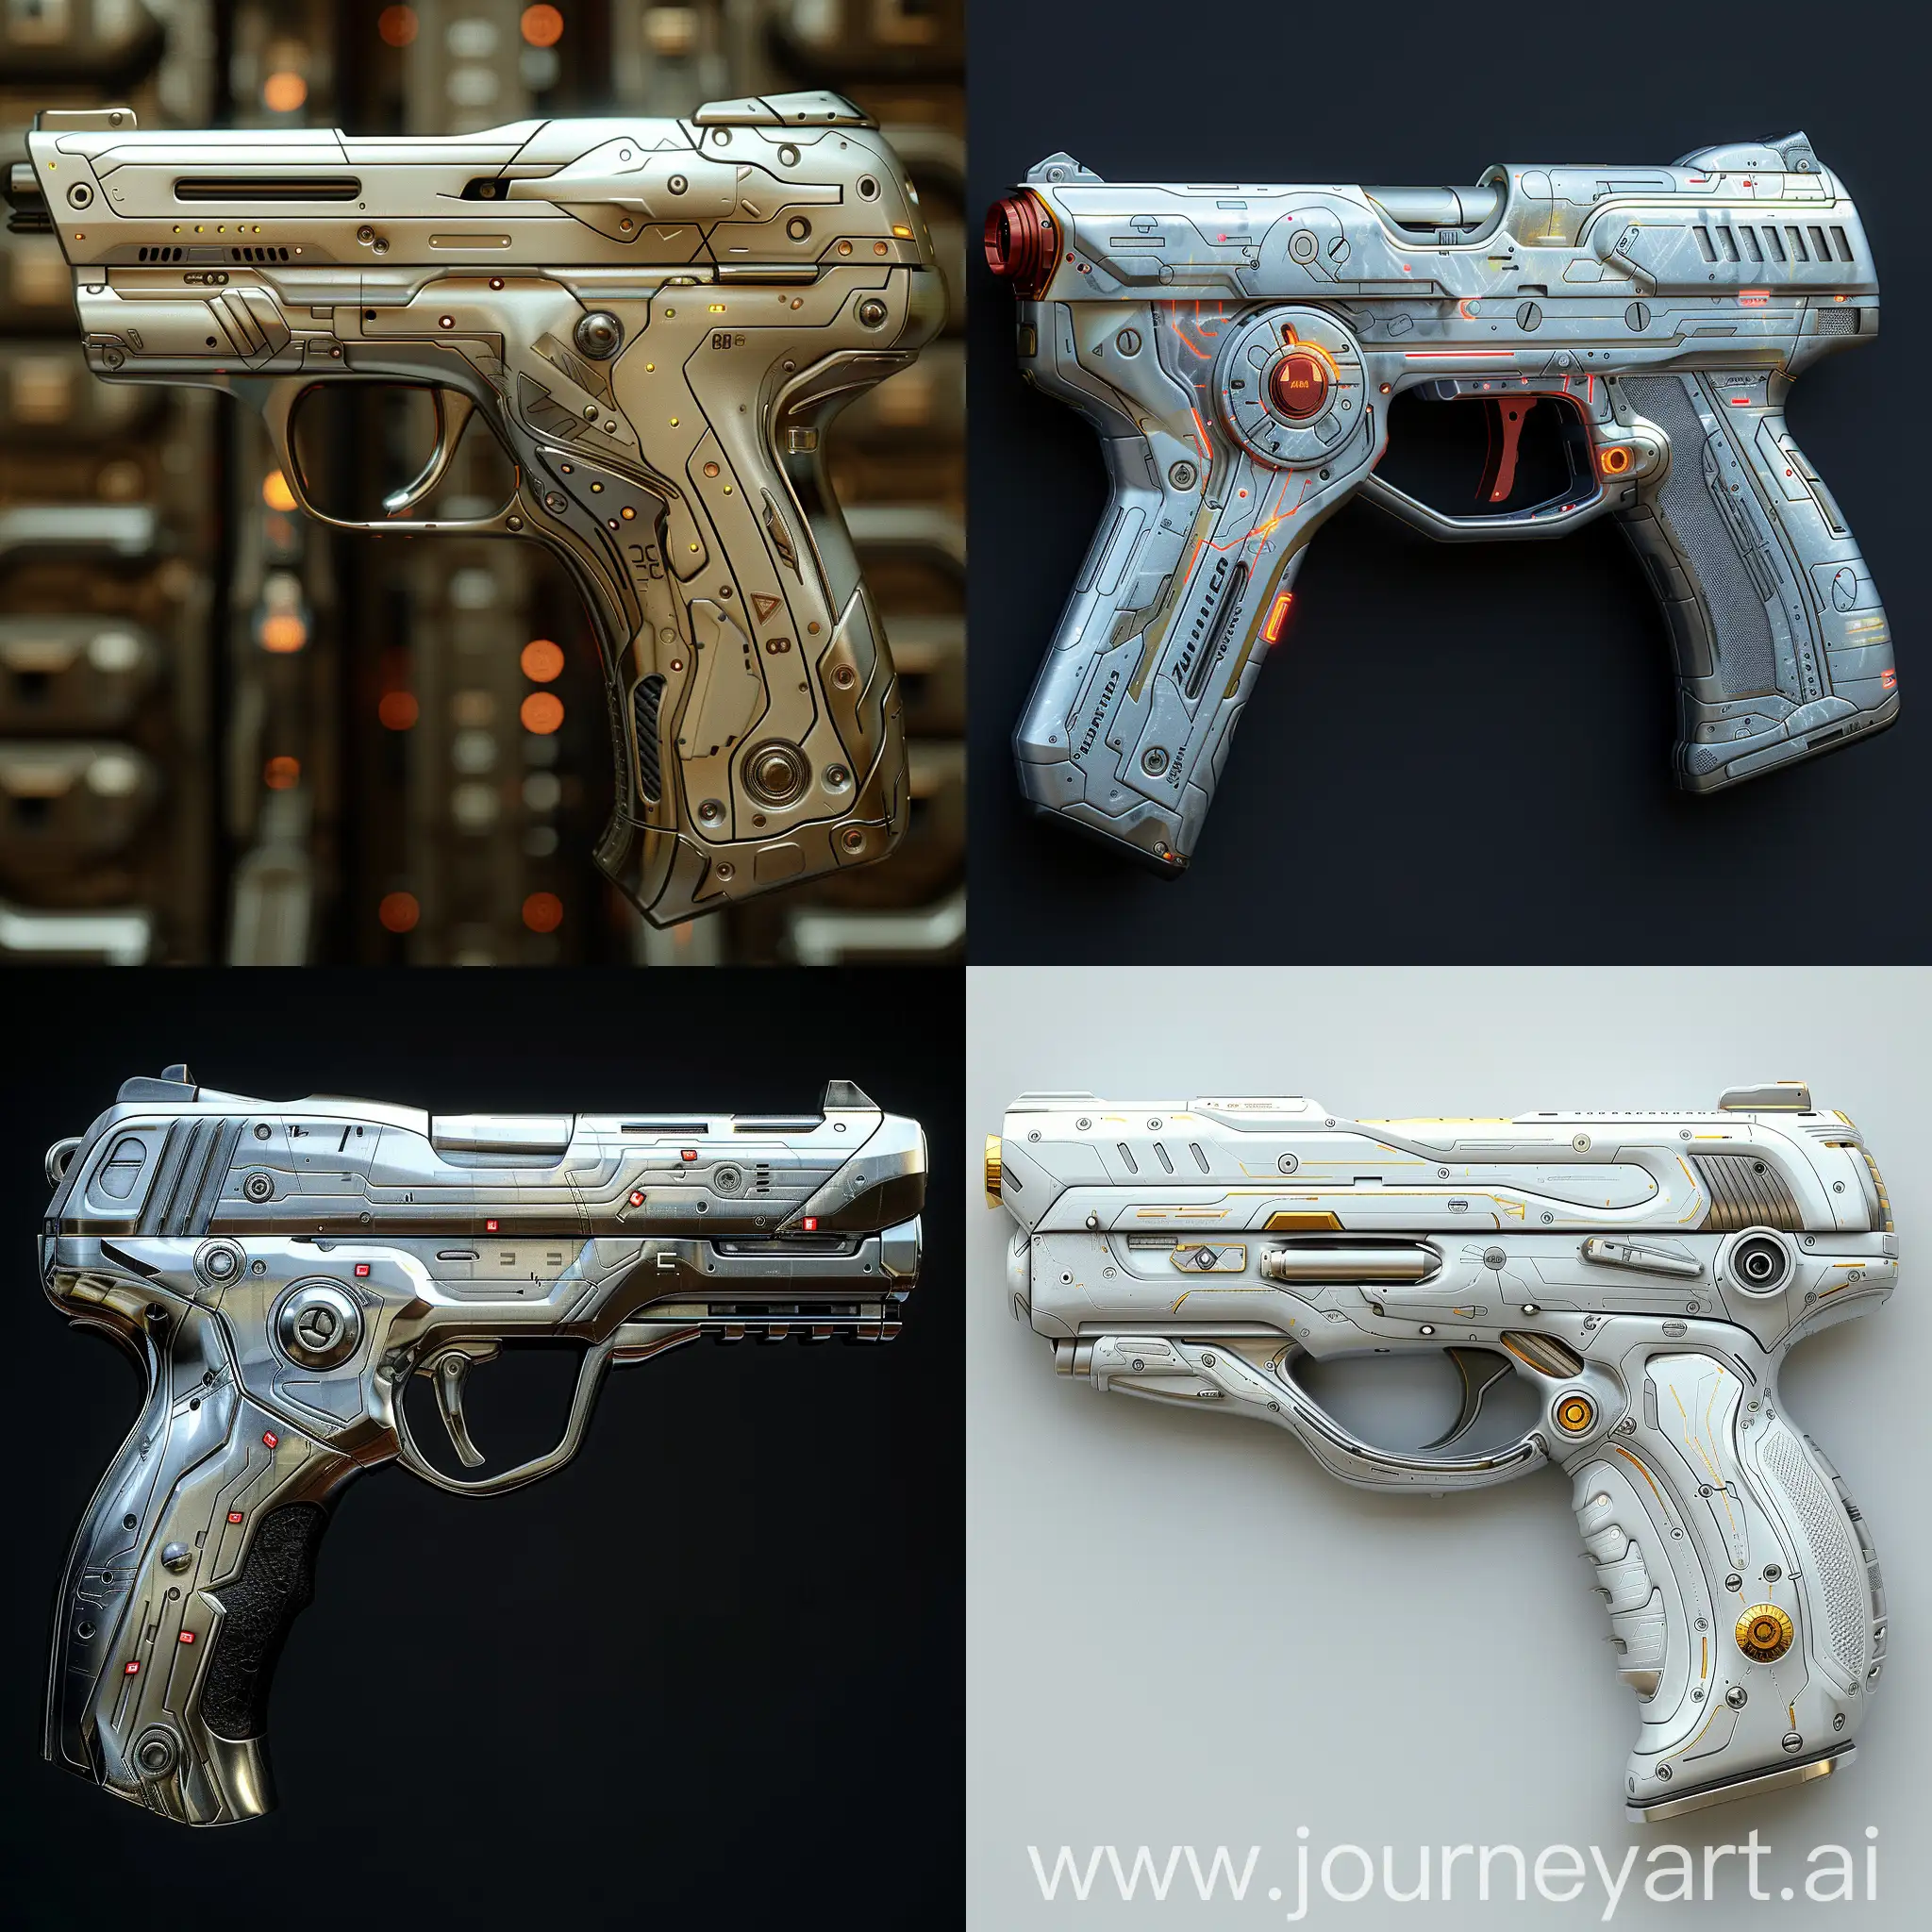 Futuristic pistol, stainless steel, electrically conductive materials, high tech, octane render --stylize 1000